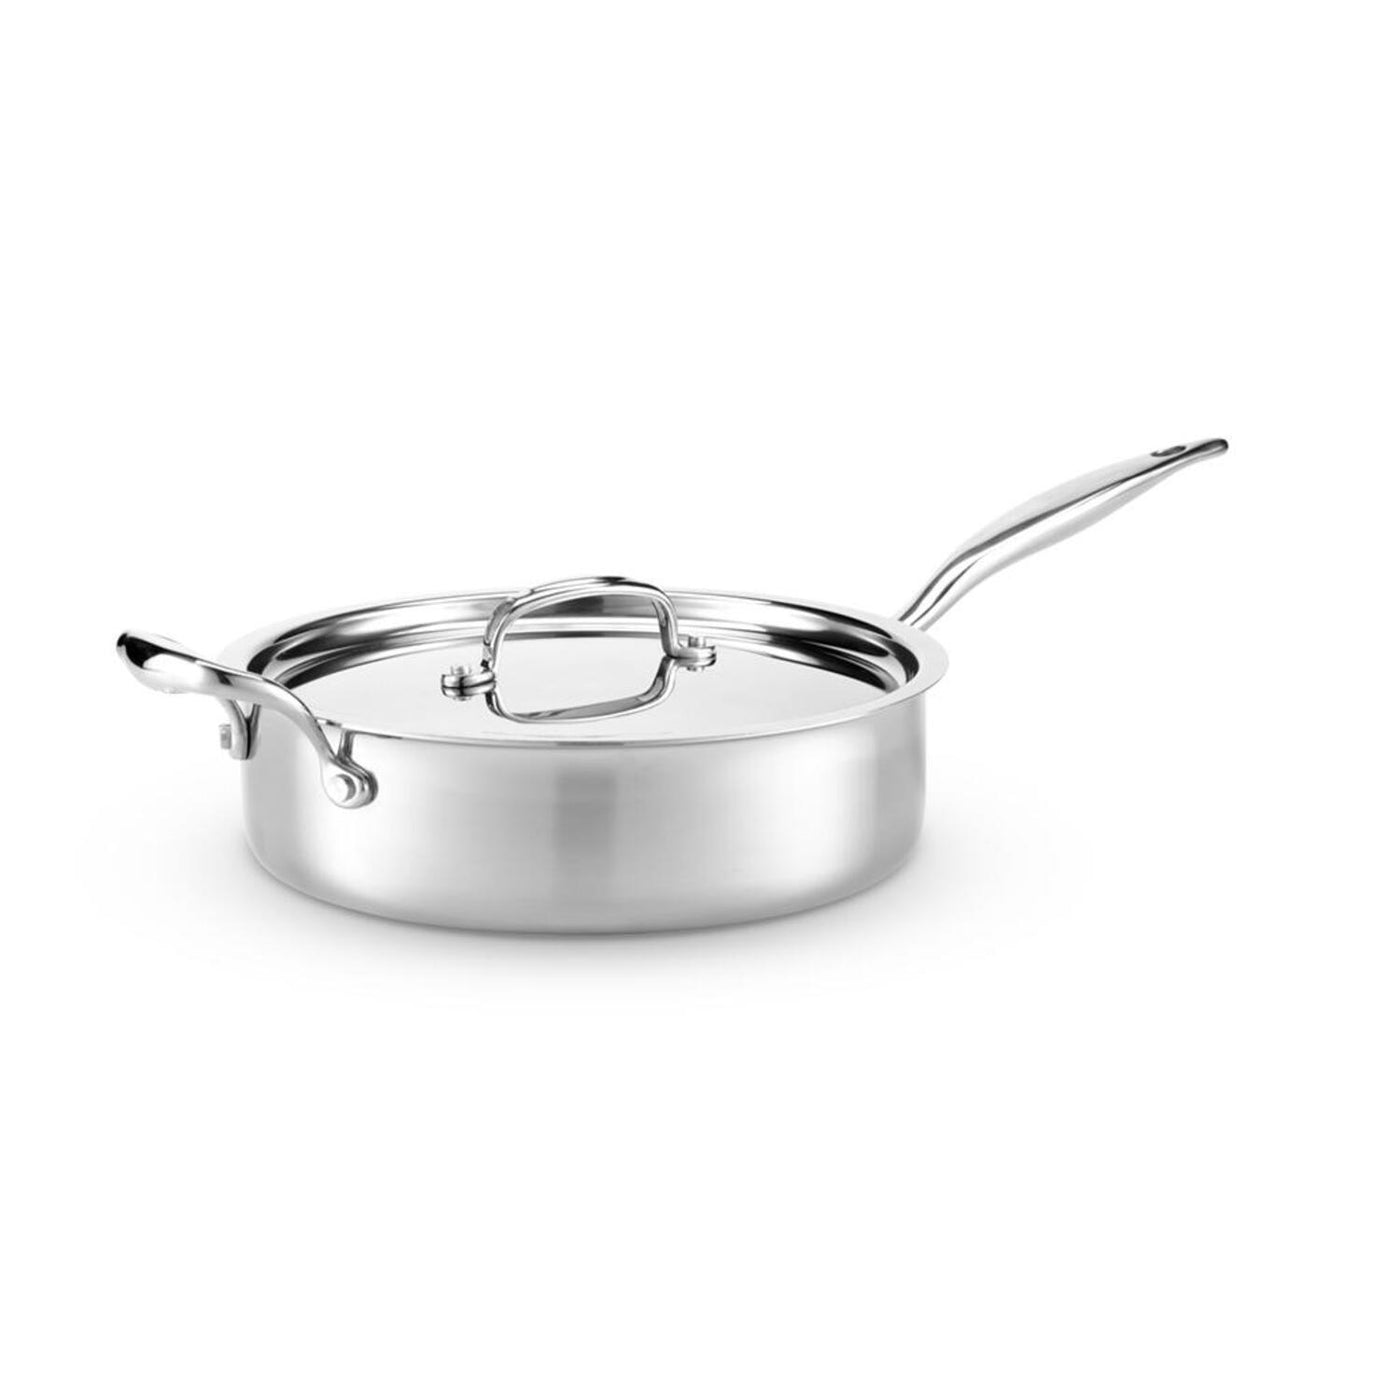 Tri-Ply Clad 8 Pc Stainless Steel Cookware Set